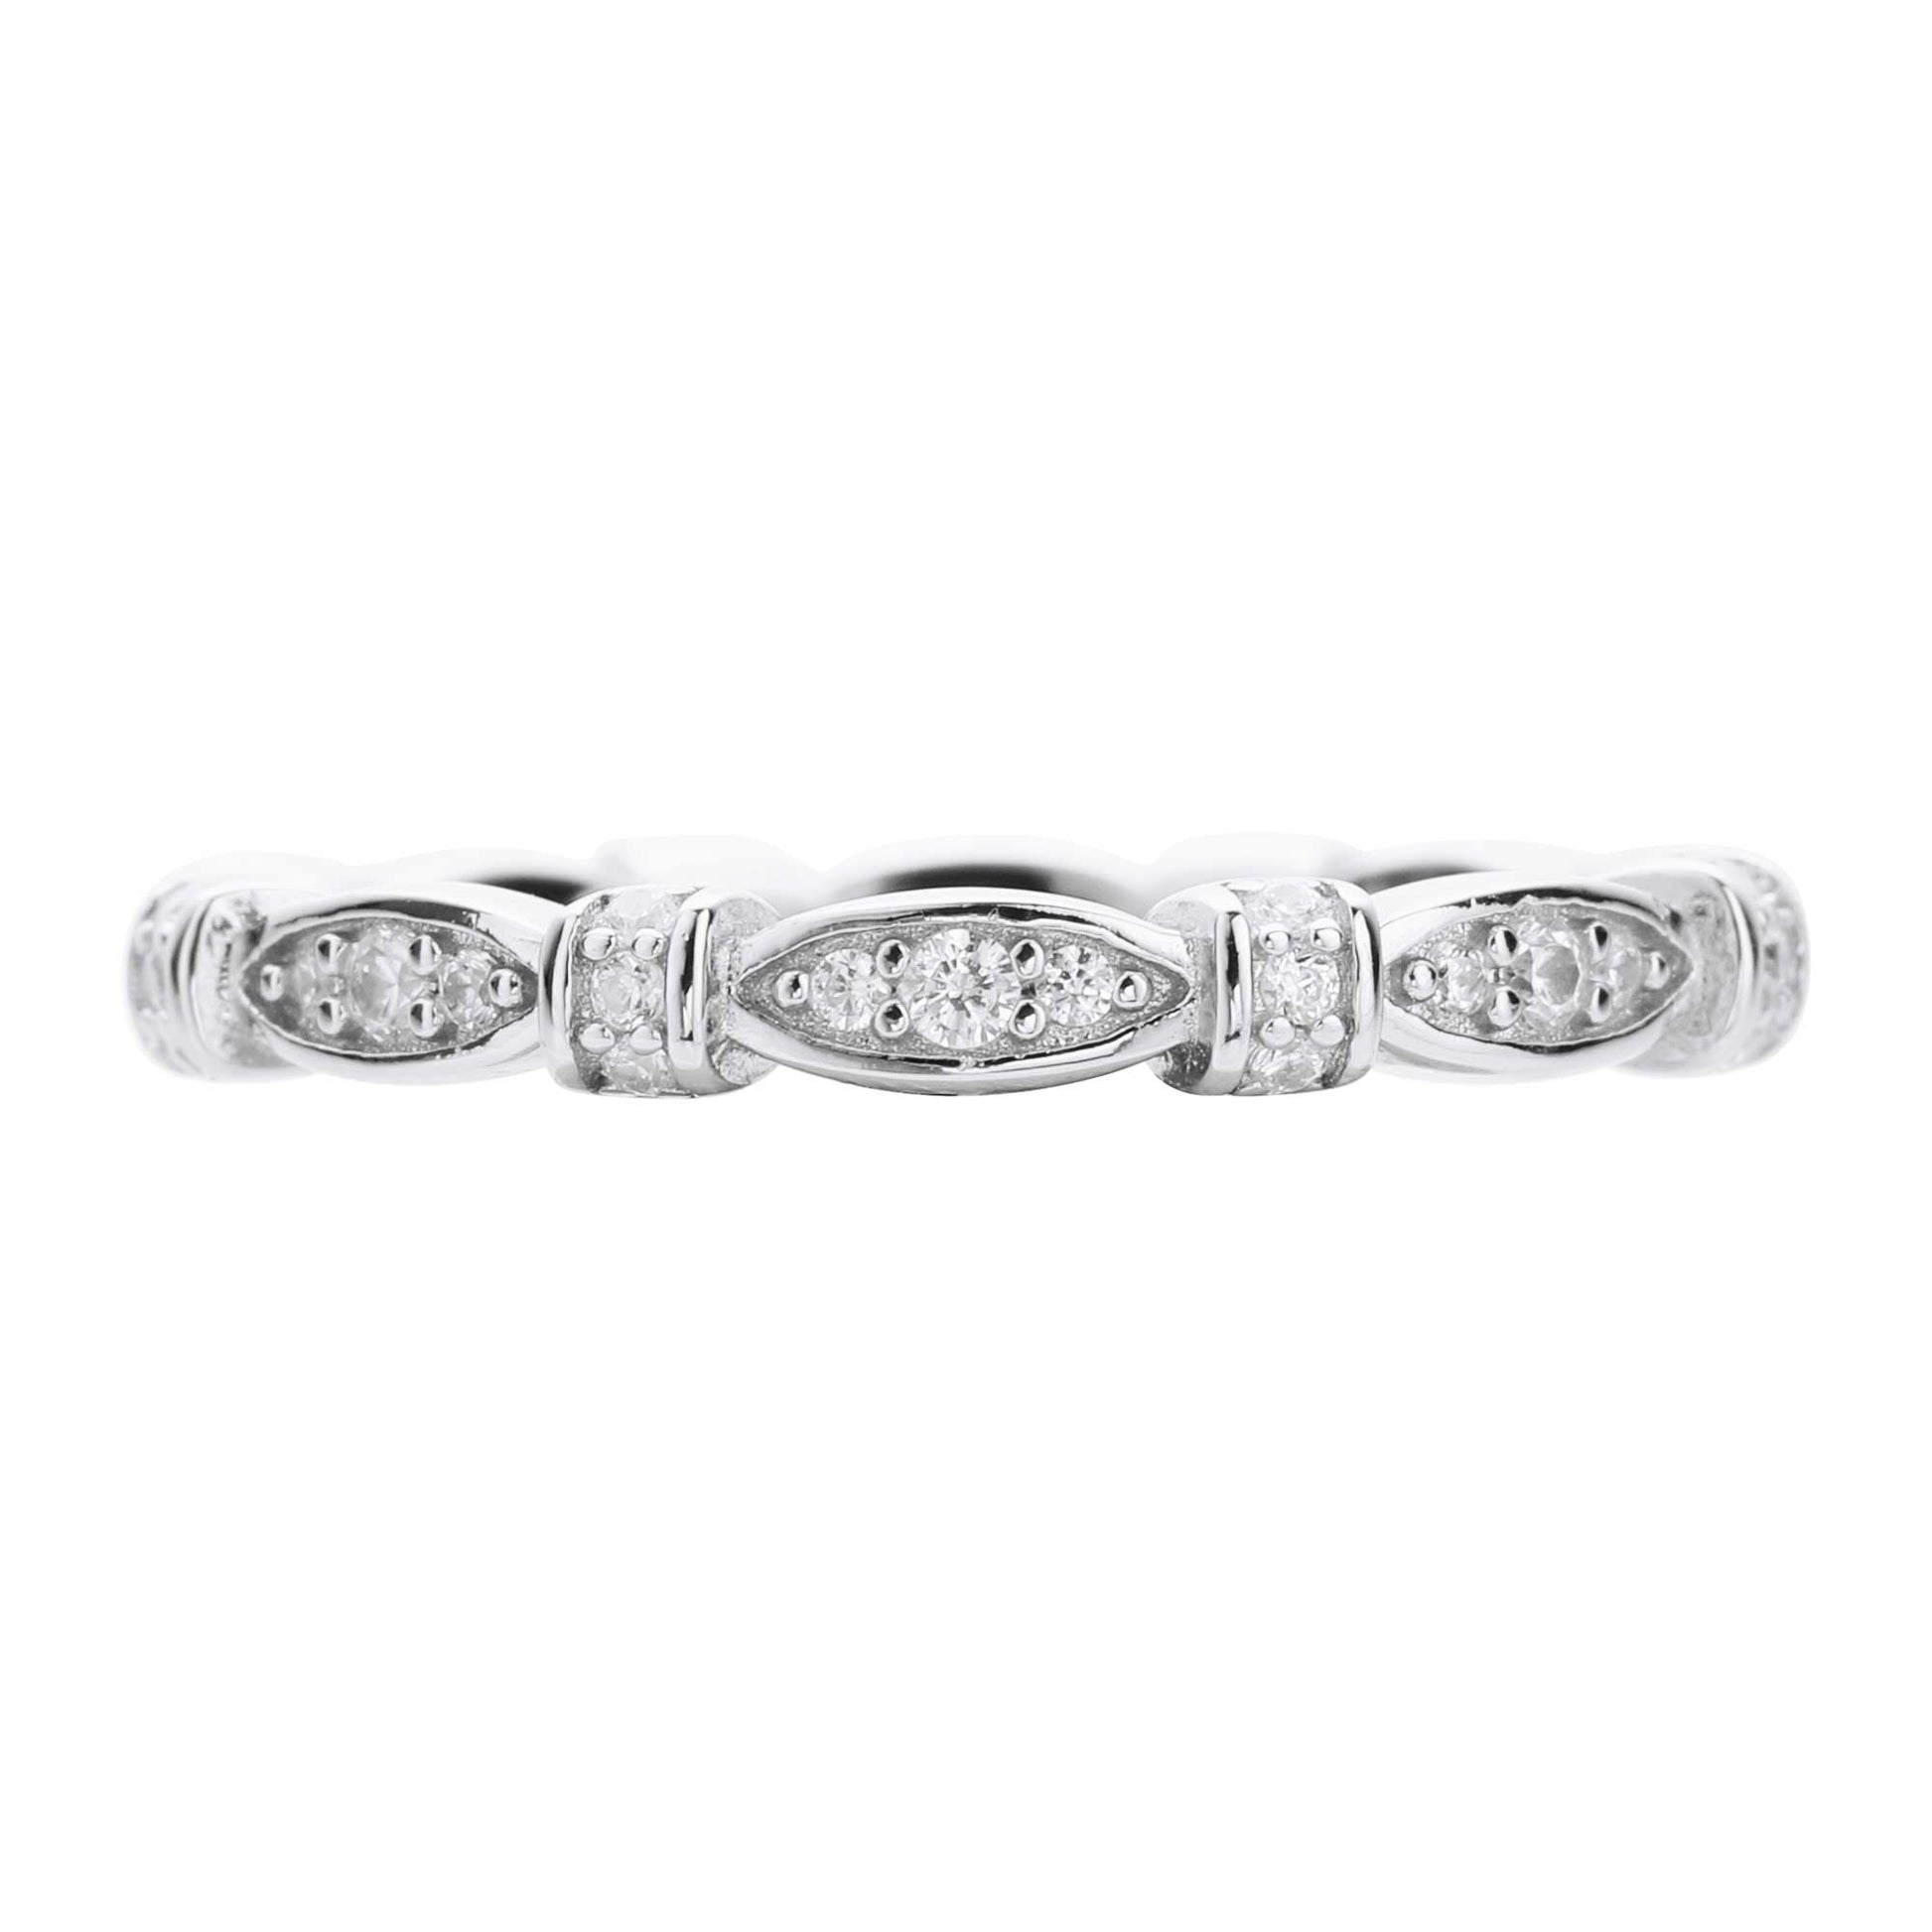 A silver ribbon scalloped style ring set with clear small gems.